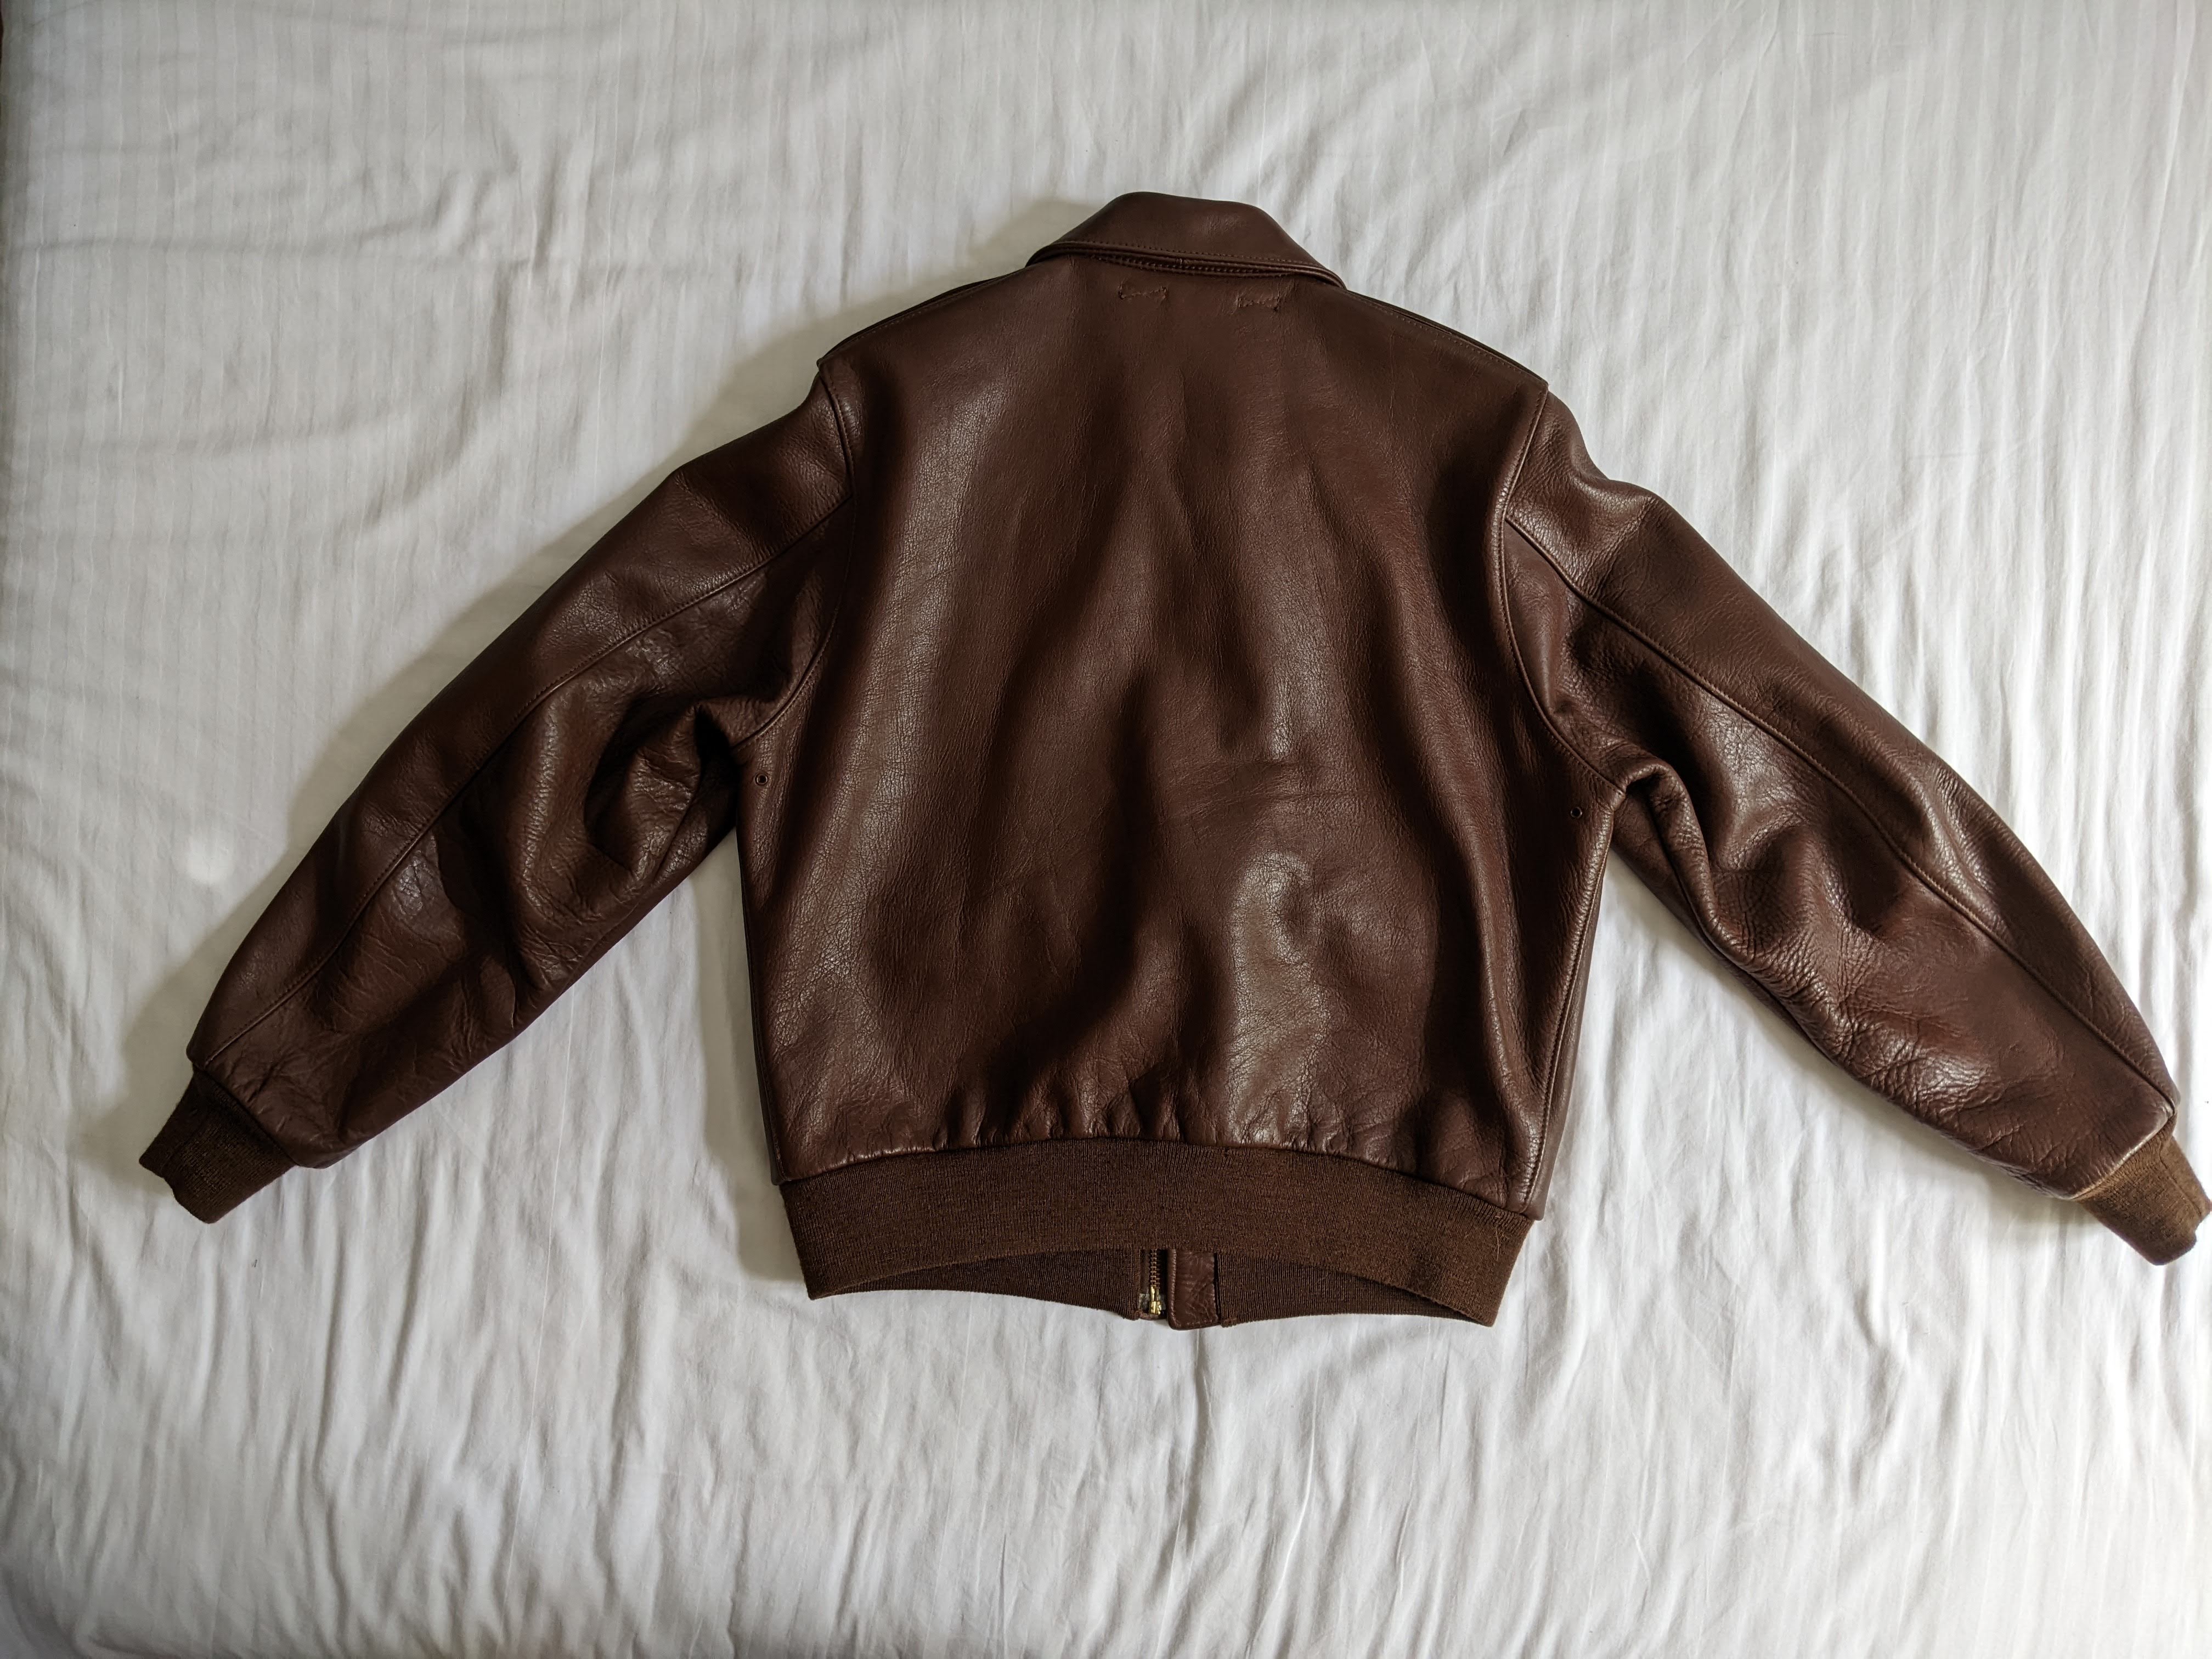 Sefton A2 available for exchange | Vintage Leather Jackets Forum